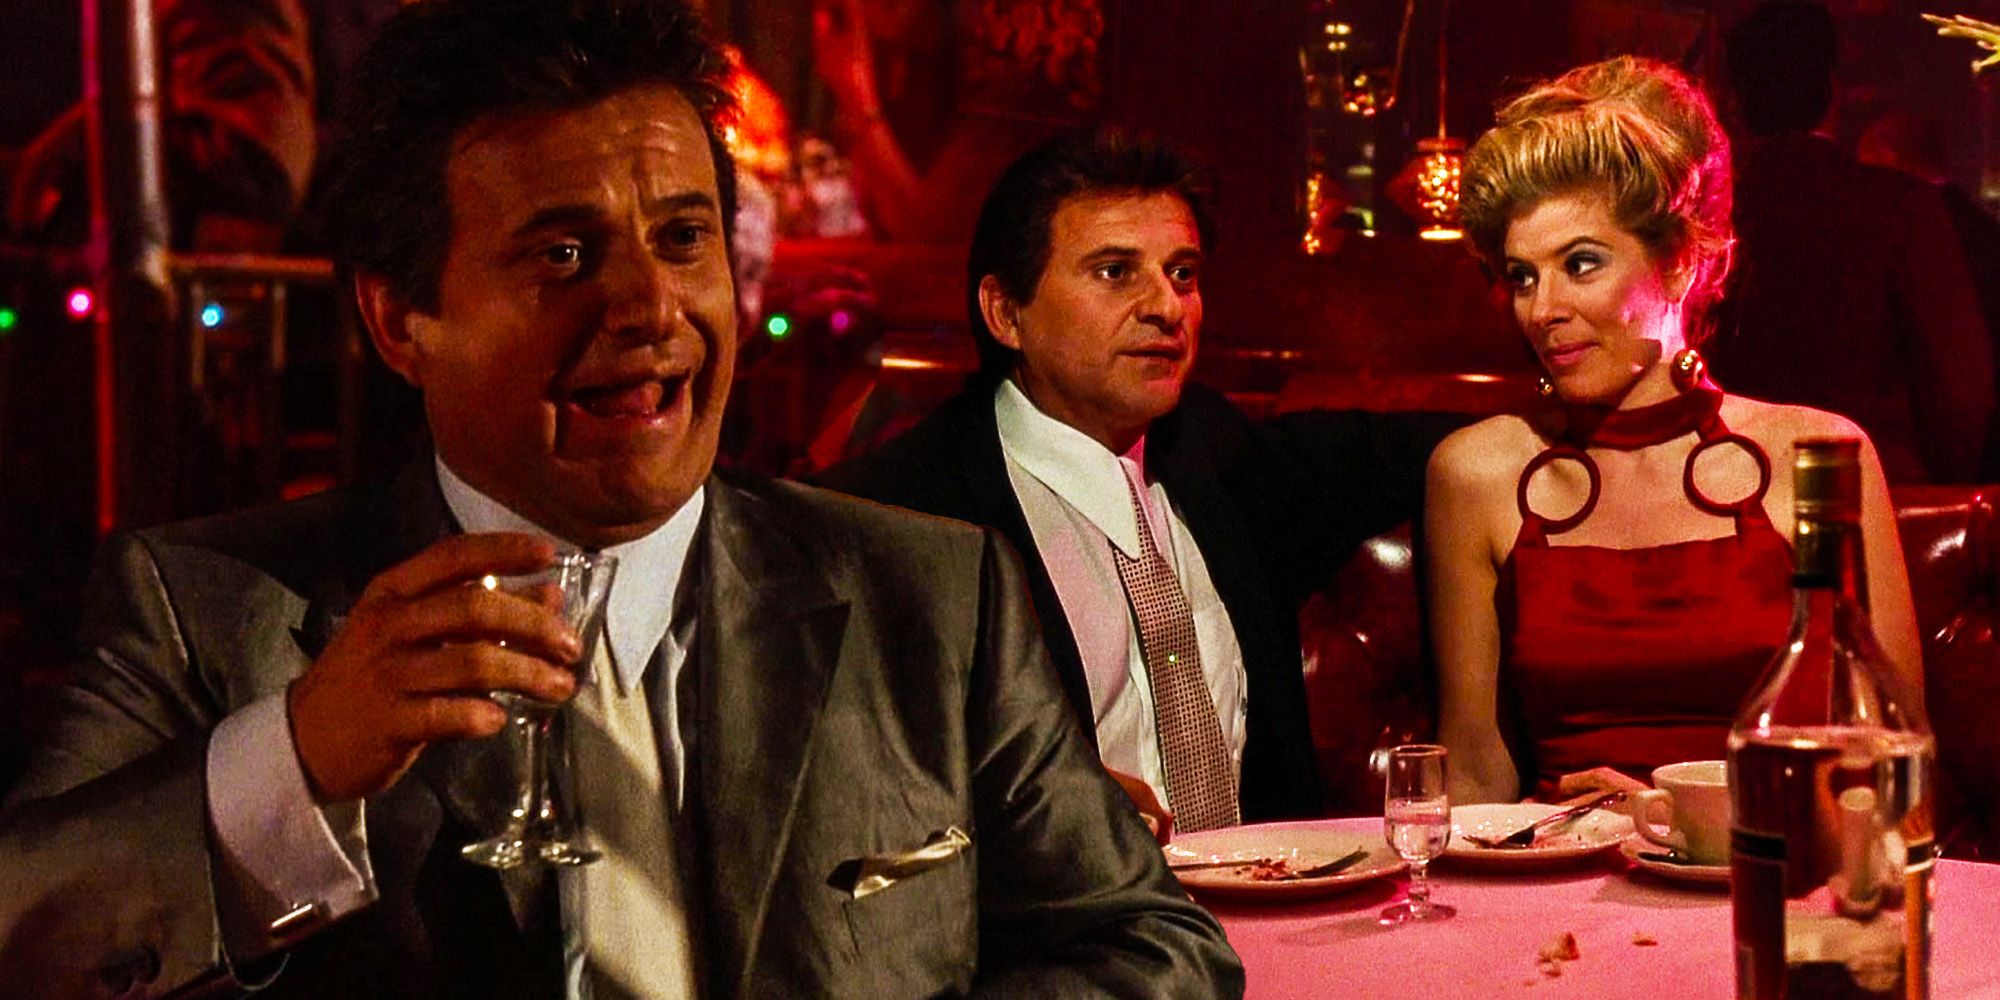 The goodfellas Tommy married